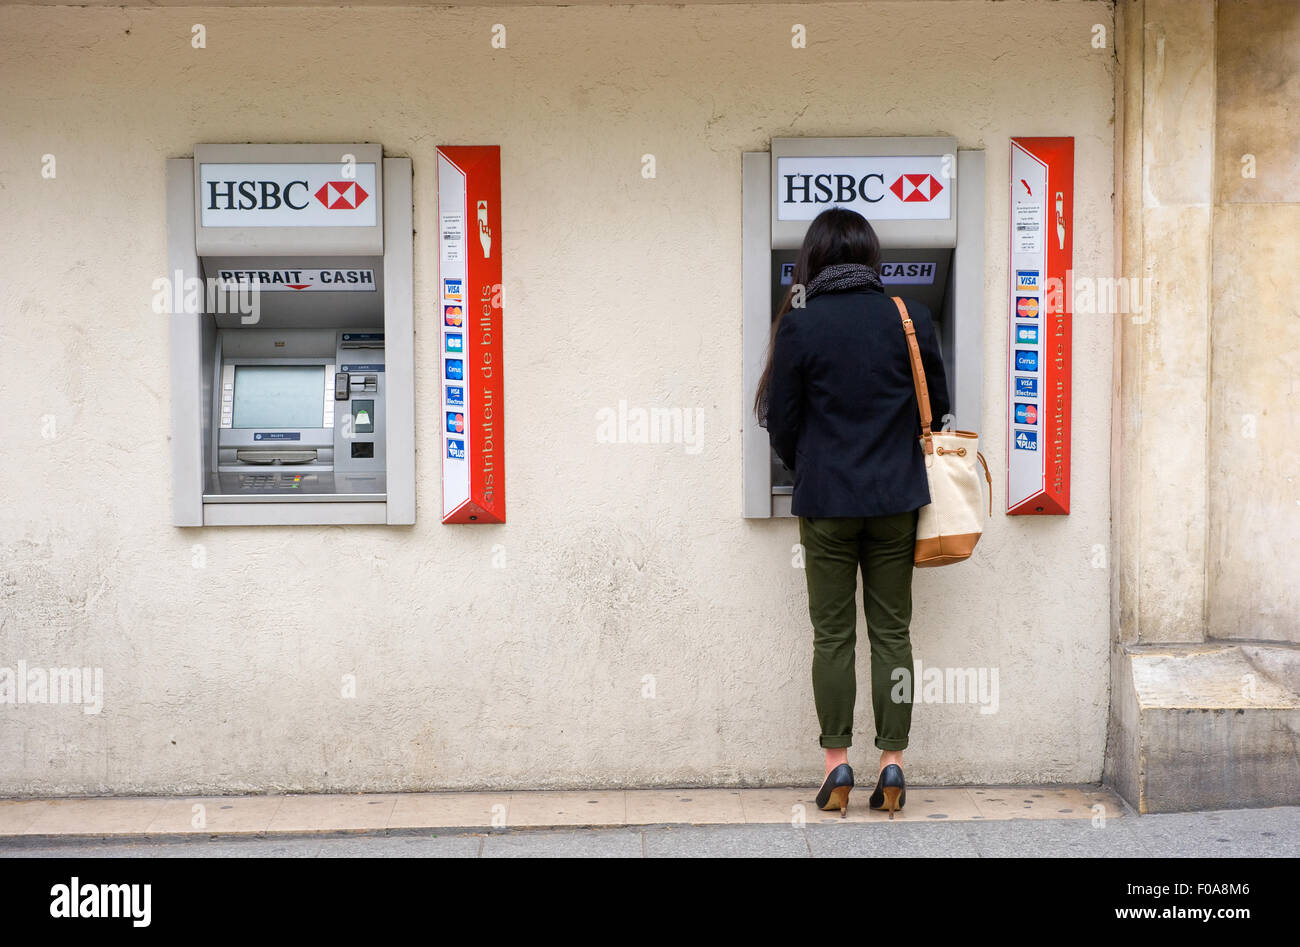 PARIS, FRANCE - JULY 28, 2015: A woman is withdrawing money from an ATM machine on a street in Paris in France. Stock Photo